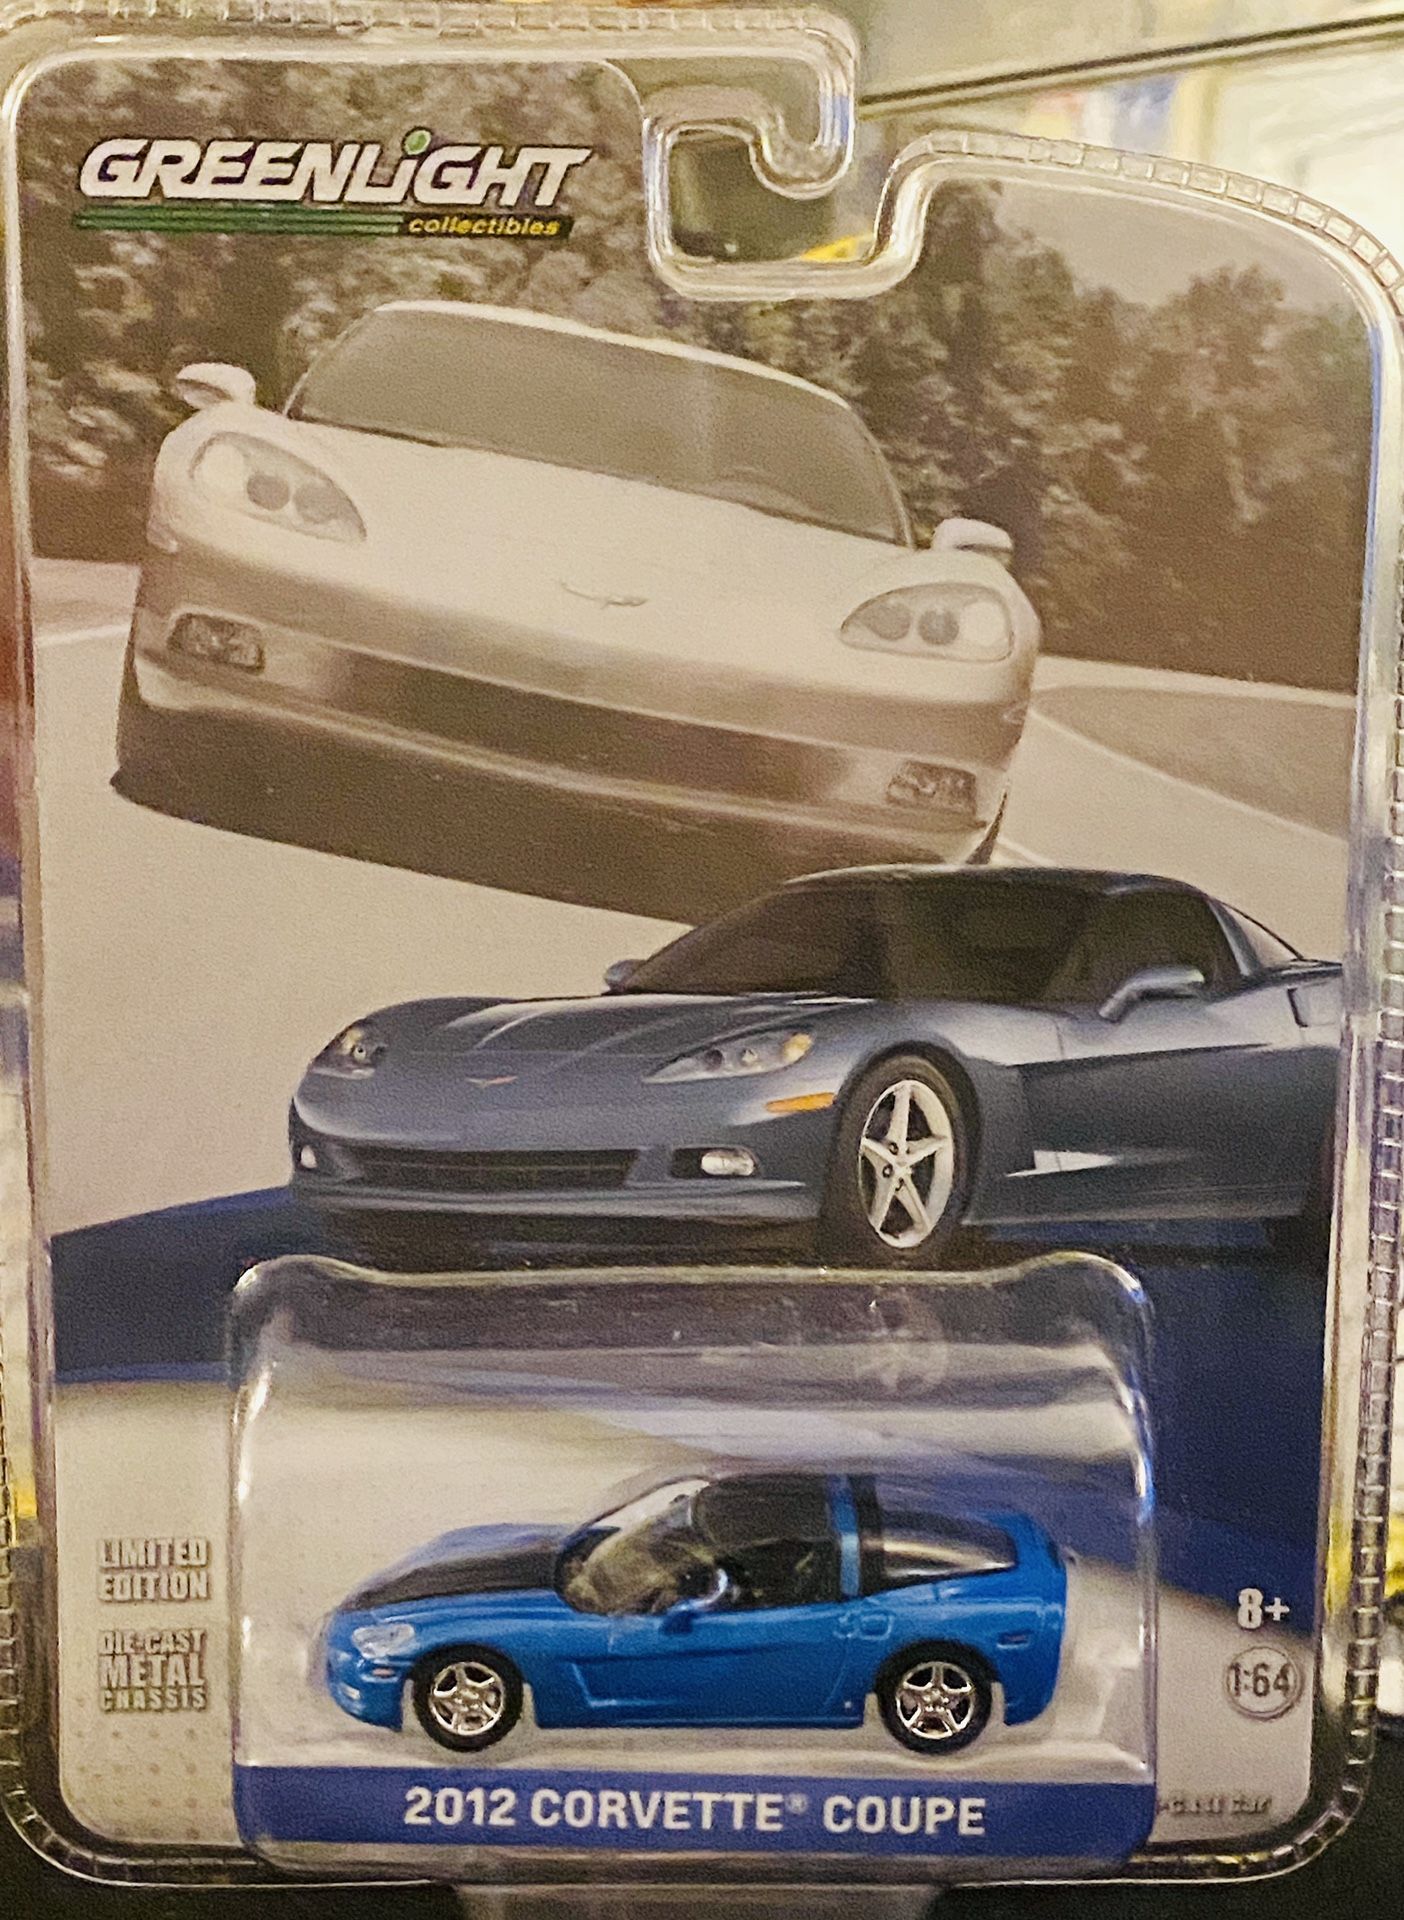 Greenlight 2012 Chevy Corvette Coupe Limited Edition new in mint condition